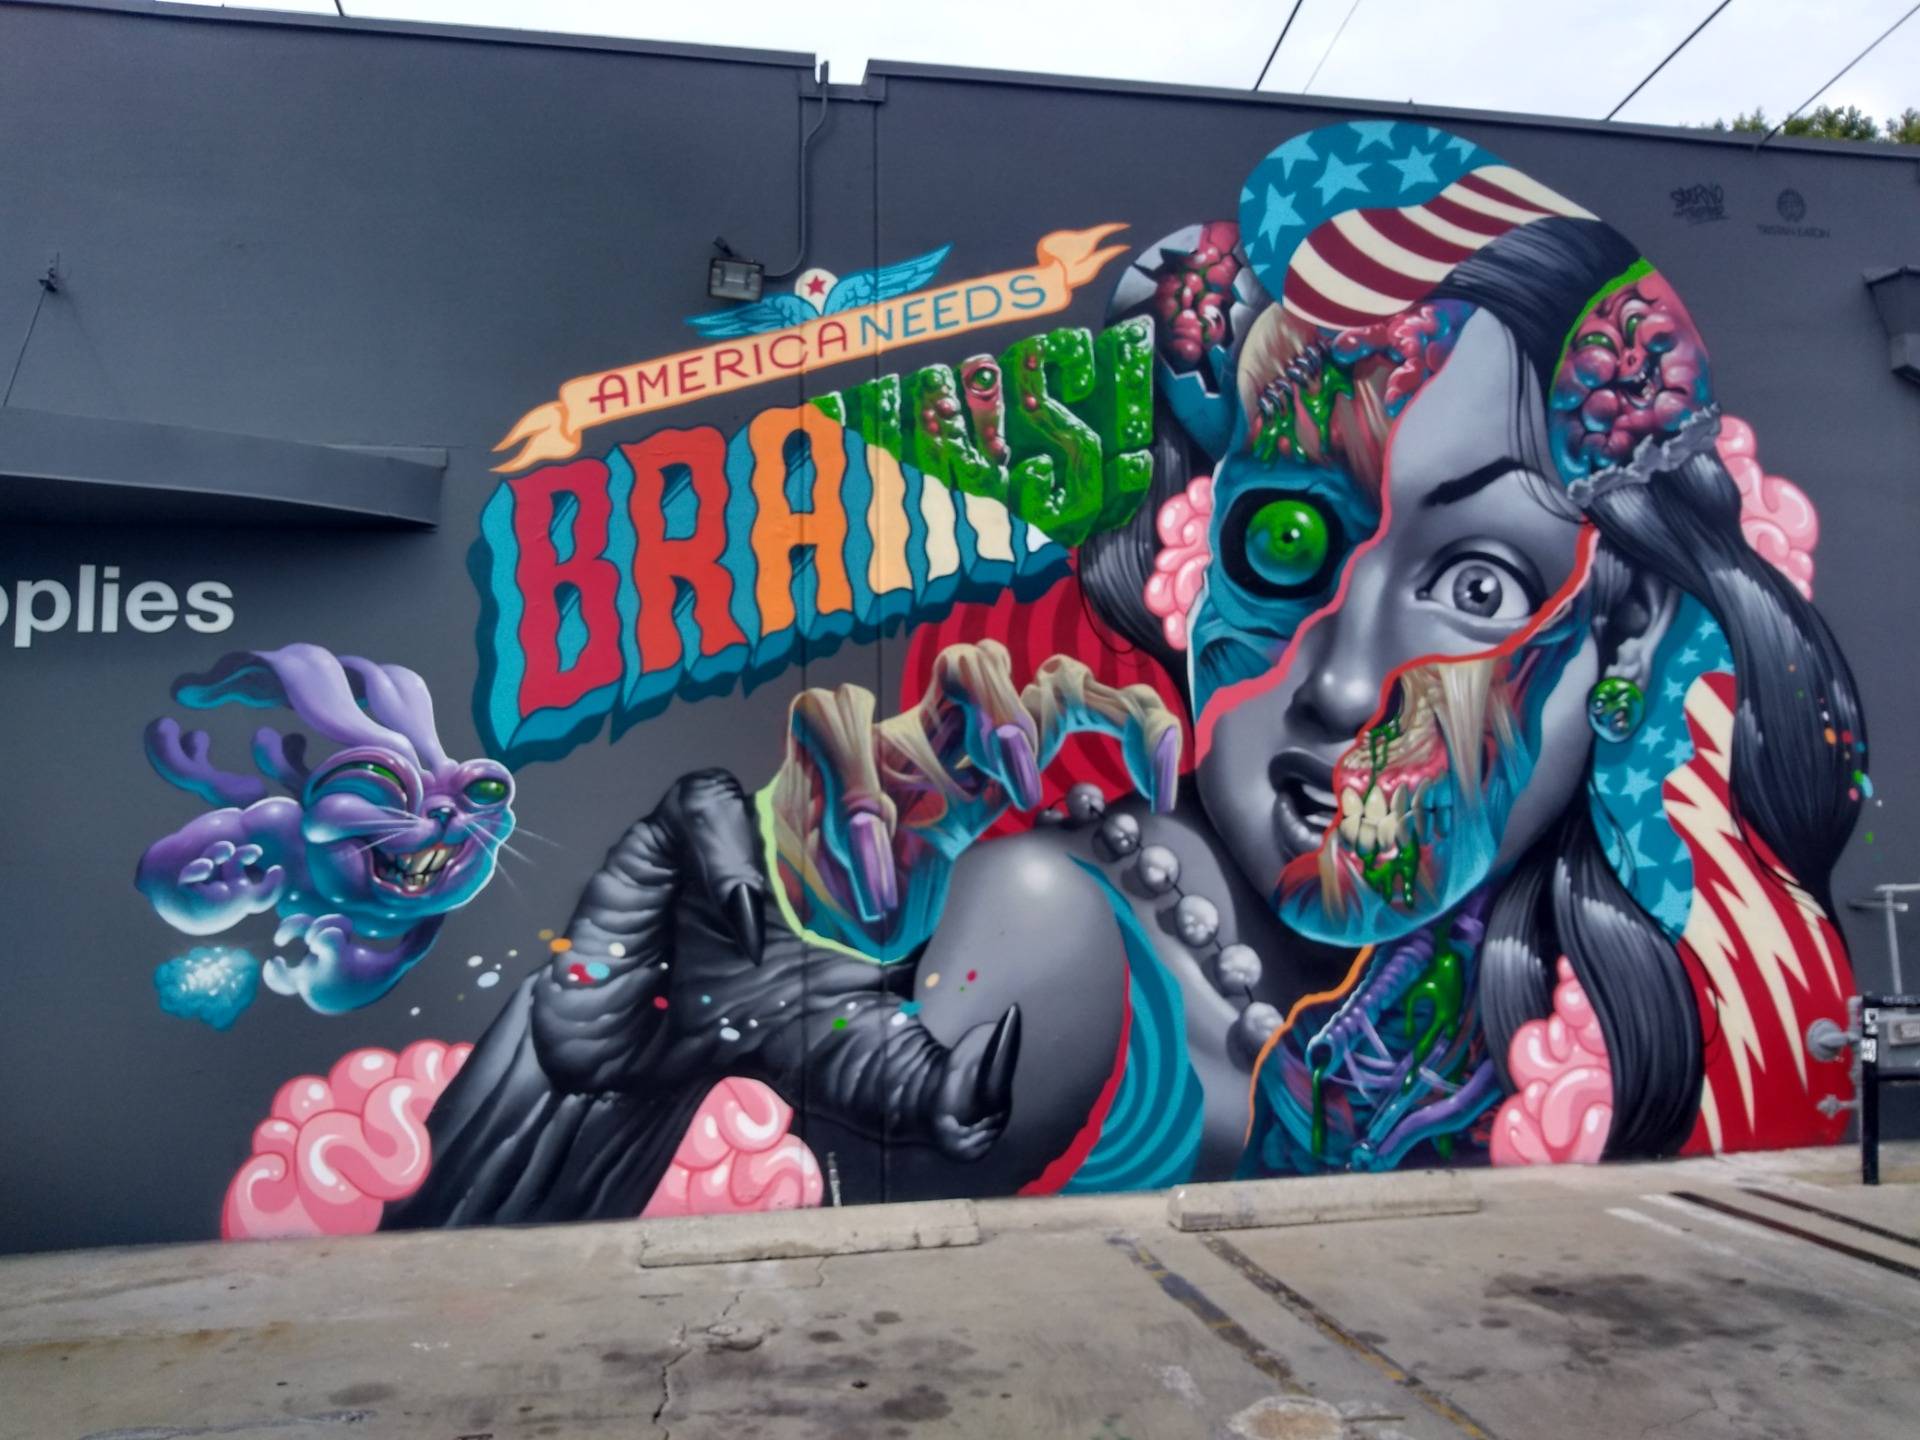 In past visits to the area I had discovered some great art in the ”Culver City Arts District”